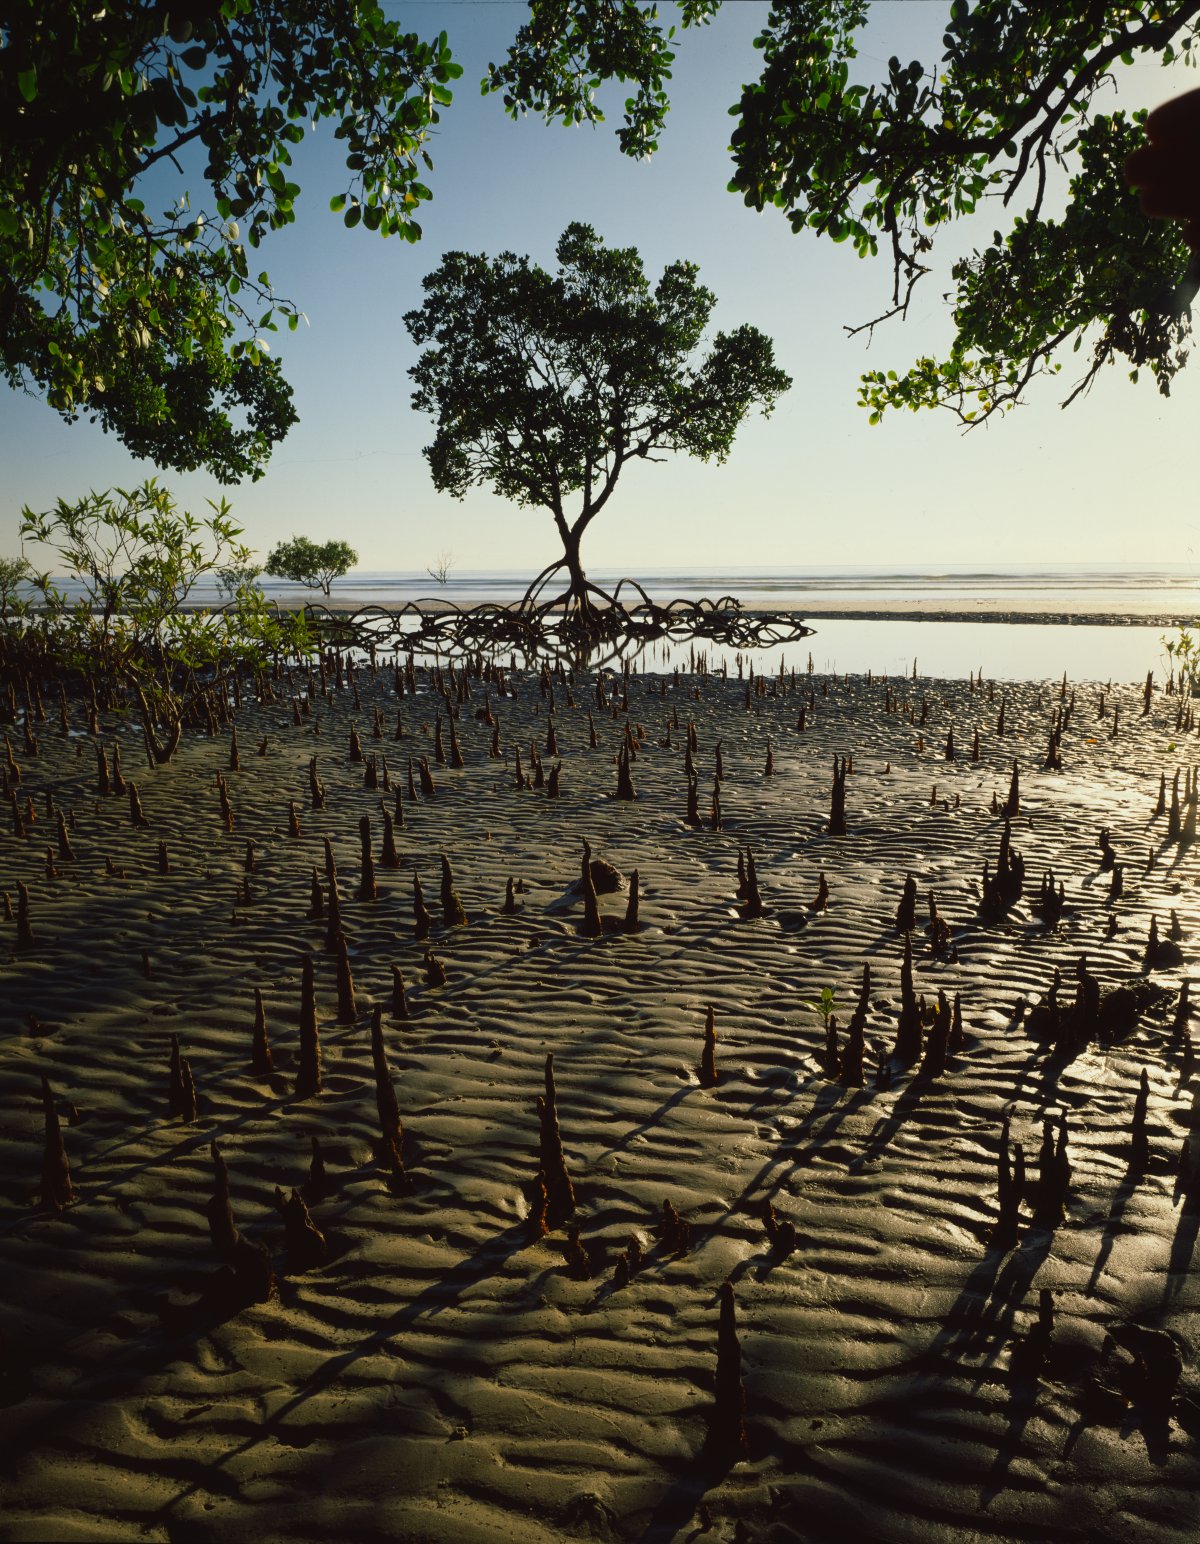 A muddy mangrove flat overhung by green trees. A large mangrove tree sits with roots out of the water in the background.